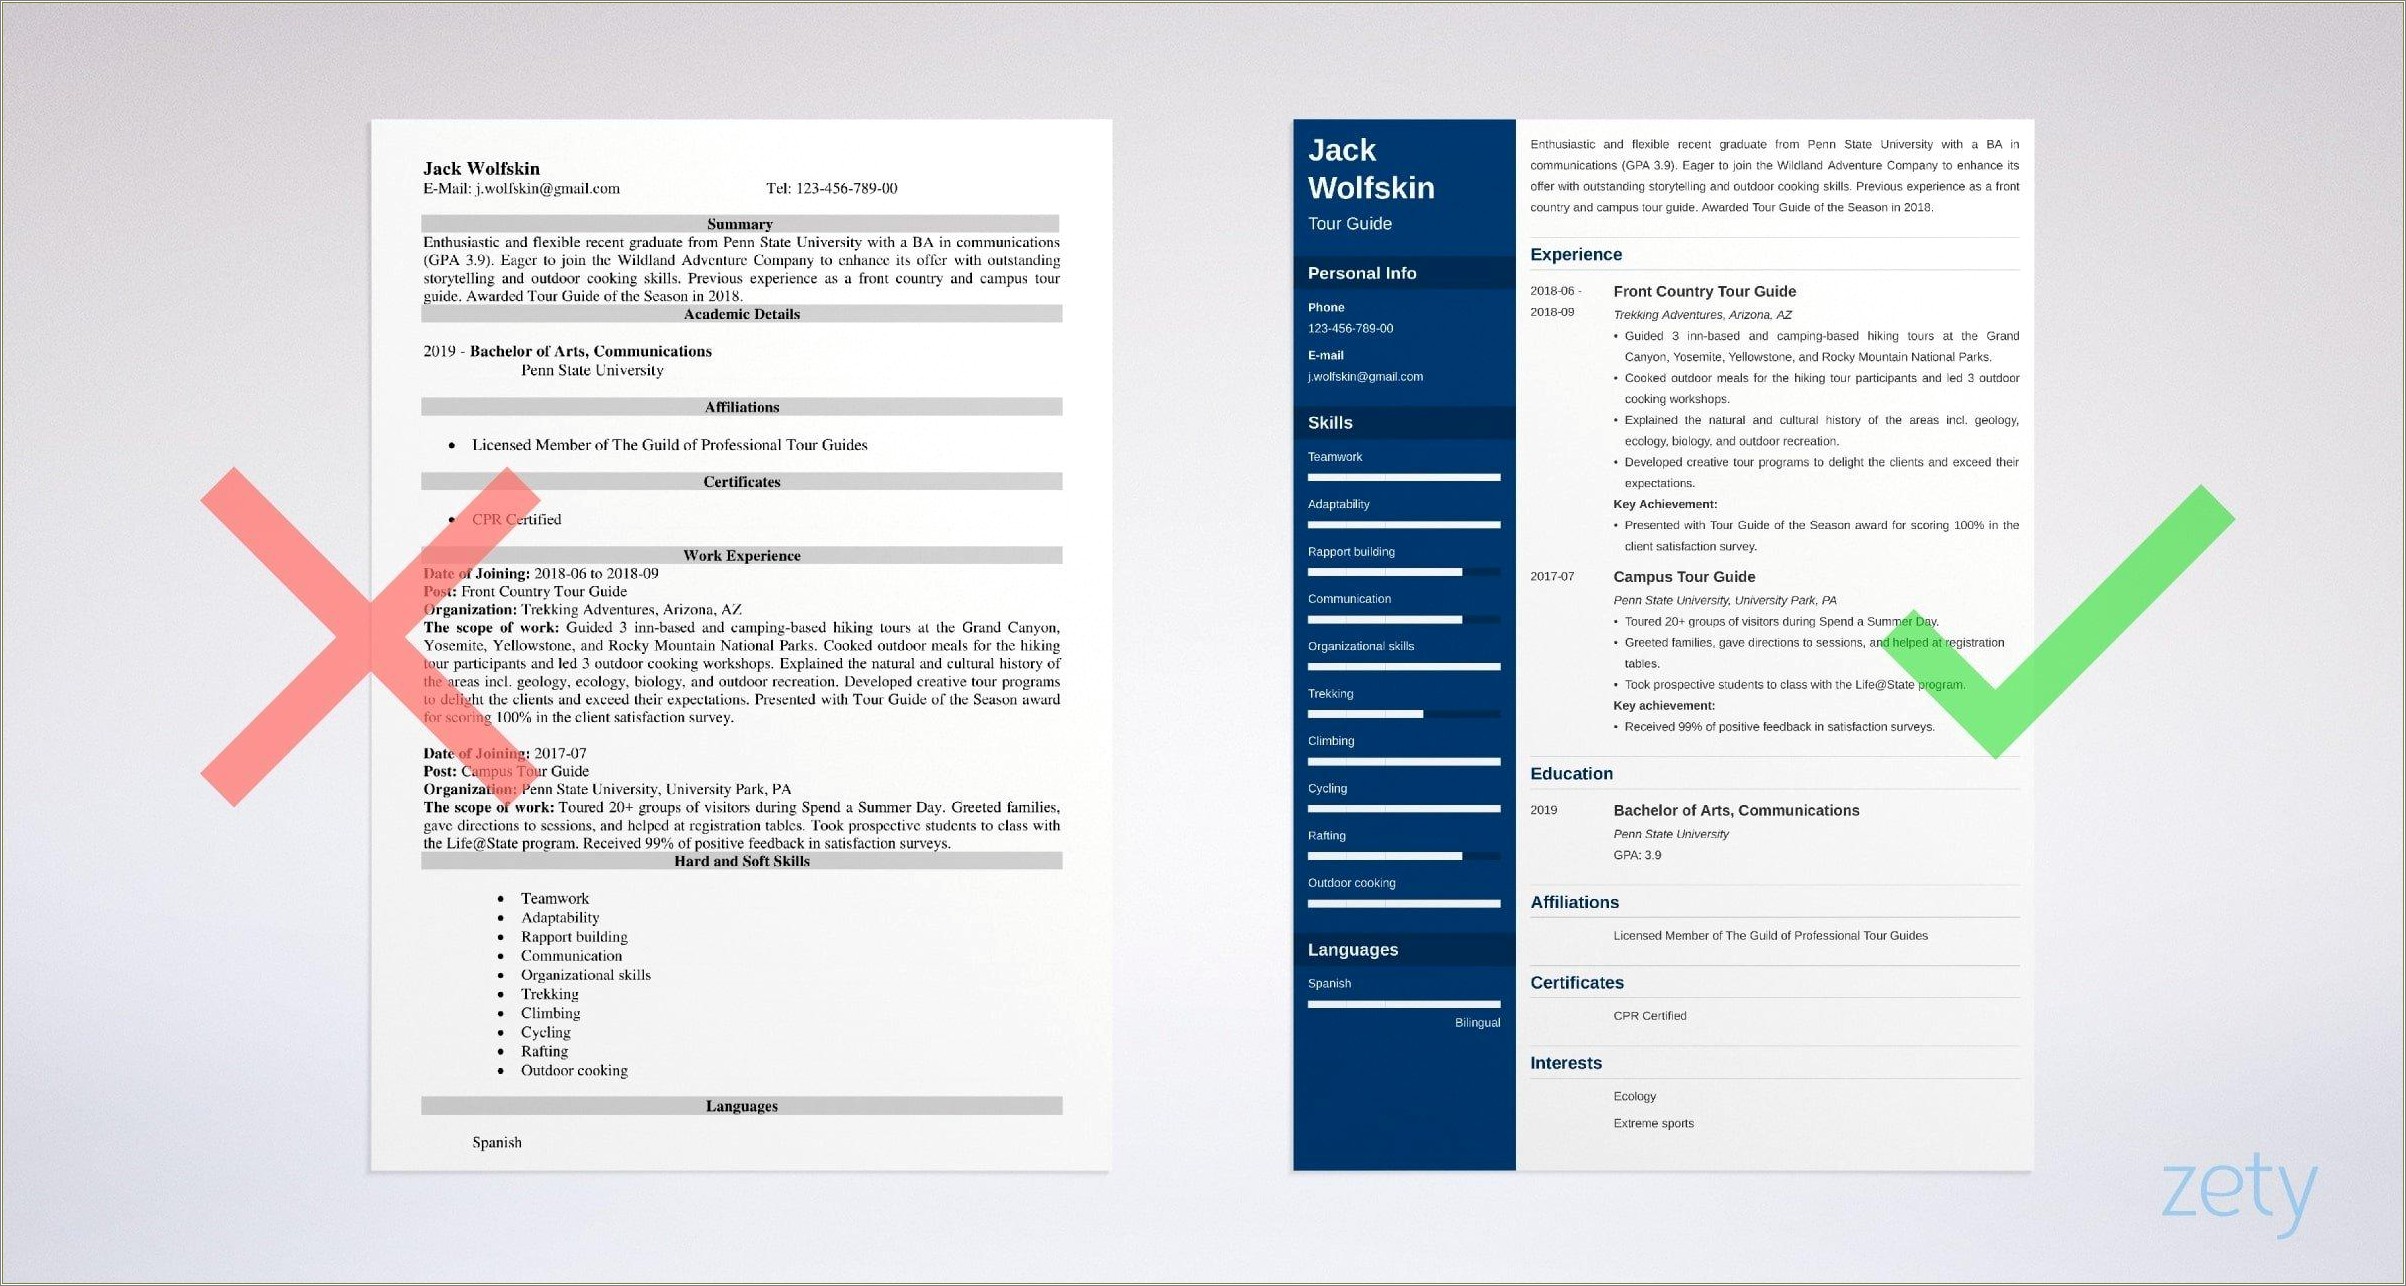 Sample Resume Retail Tour Guide Experience